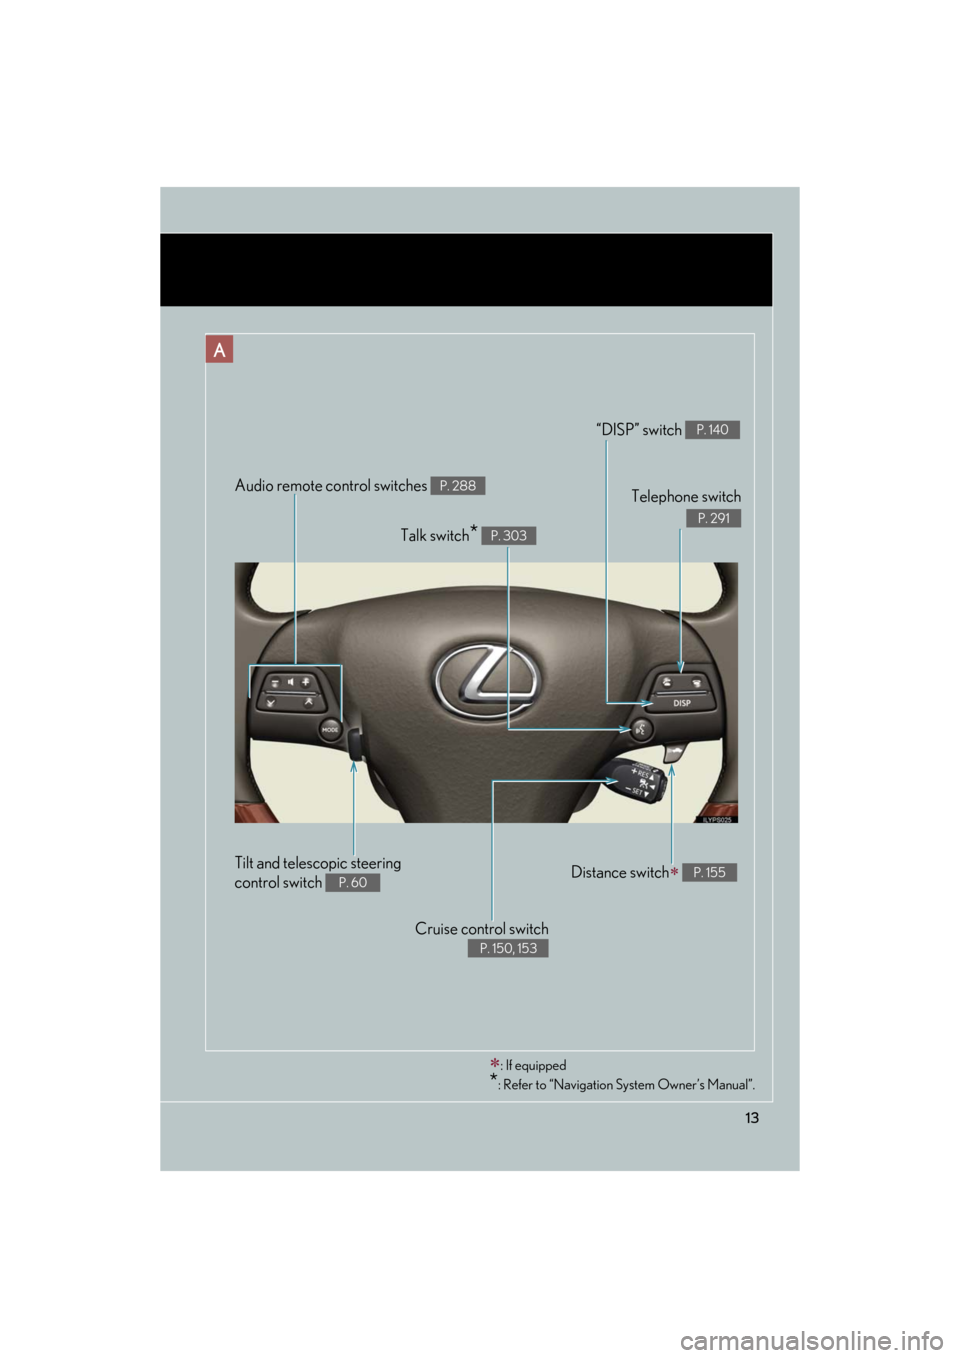 Lexus GS350 2008  Do-it-yourself maintenance / LEXUS 2008 GS460/350  (OM30A87U) User Guide 13
GS_G_U
May 13, 2008 5:14 pm
Audio remote control switches P. 288
Cruise control switch 
 
P. 150, 153
Telephone switch 
P. 291
“DISP” switch P. 140
Distance switch P. 155
Talk switch* P. 303